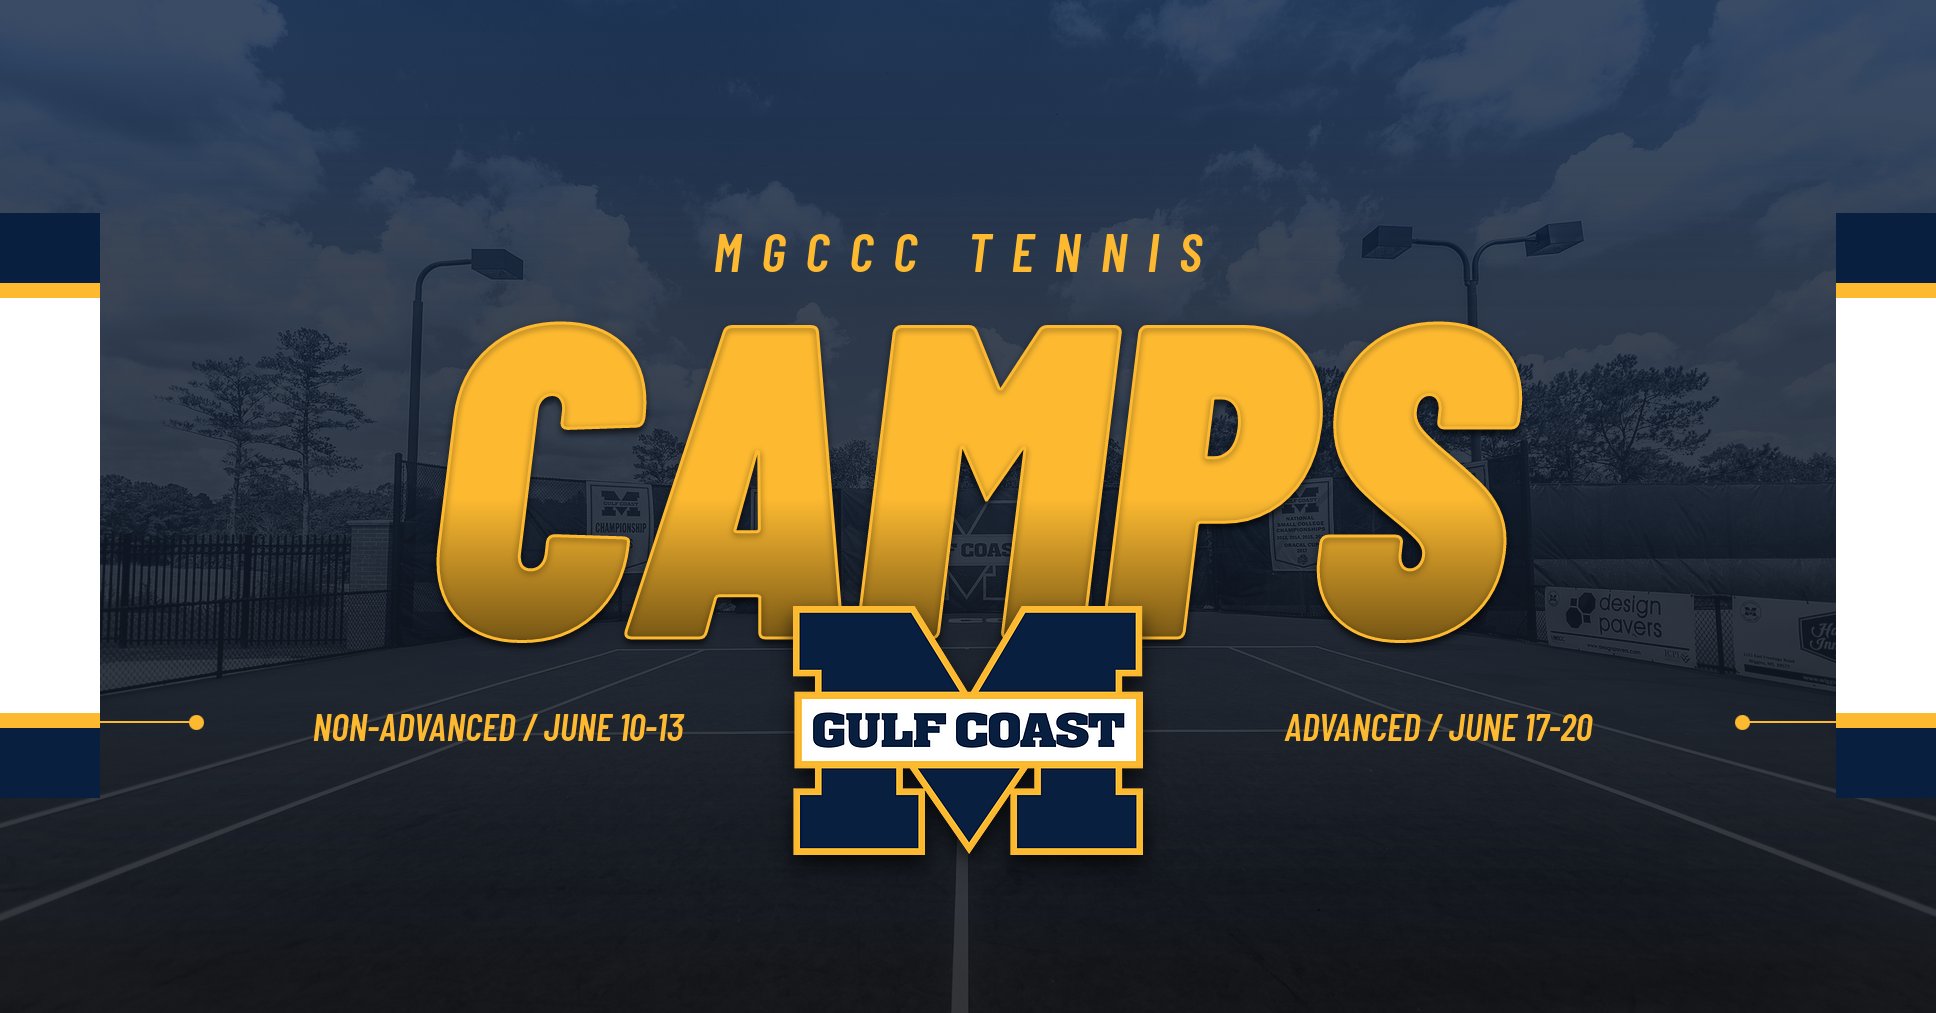 MGCCC Tennis to host 2 camps